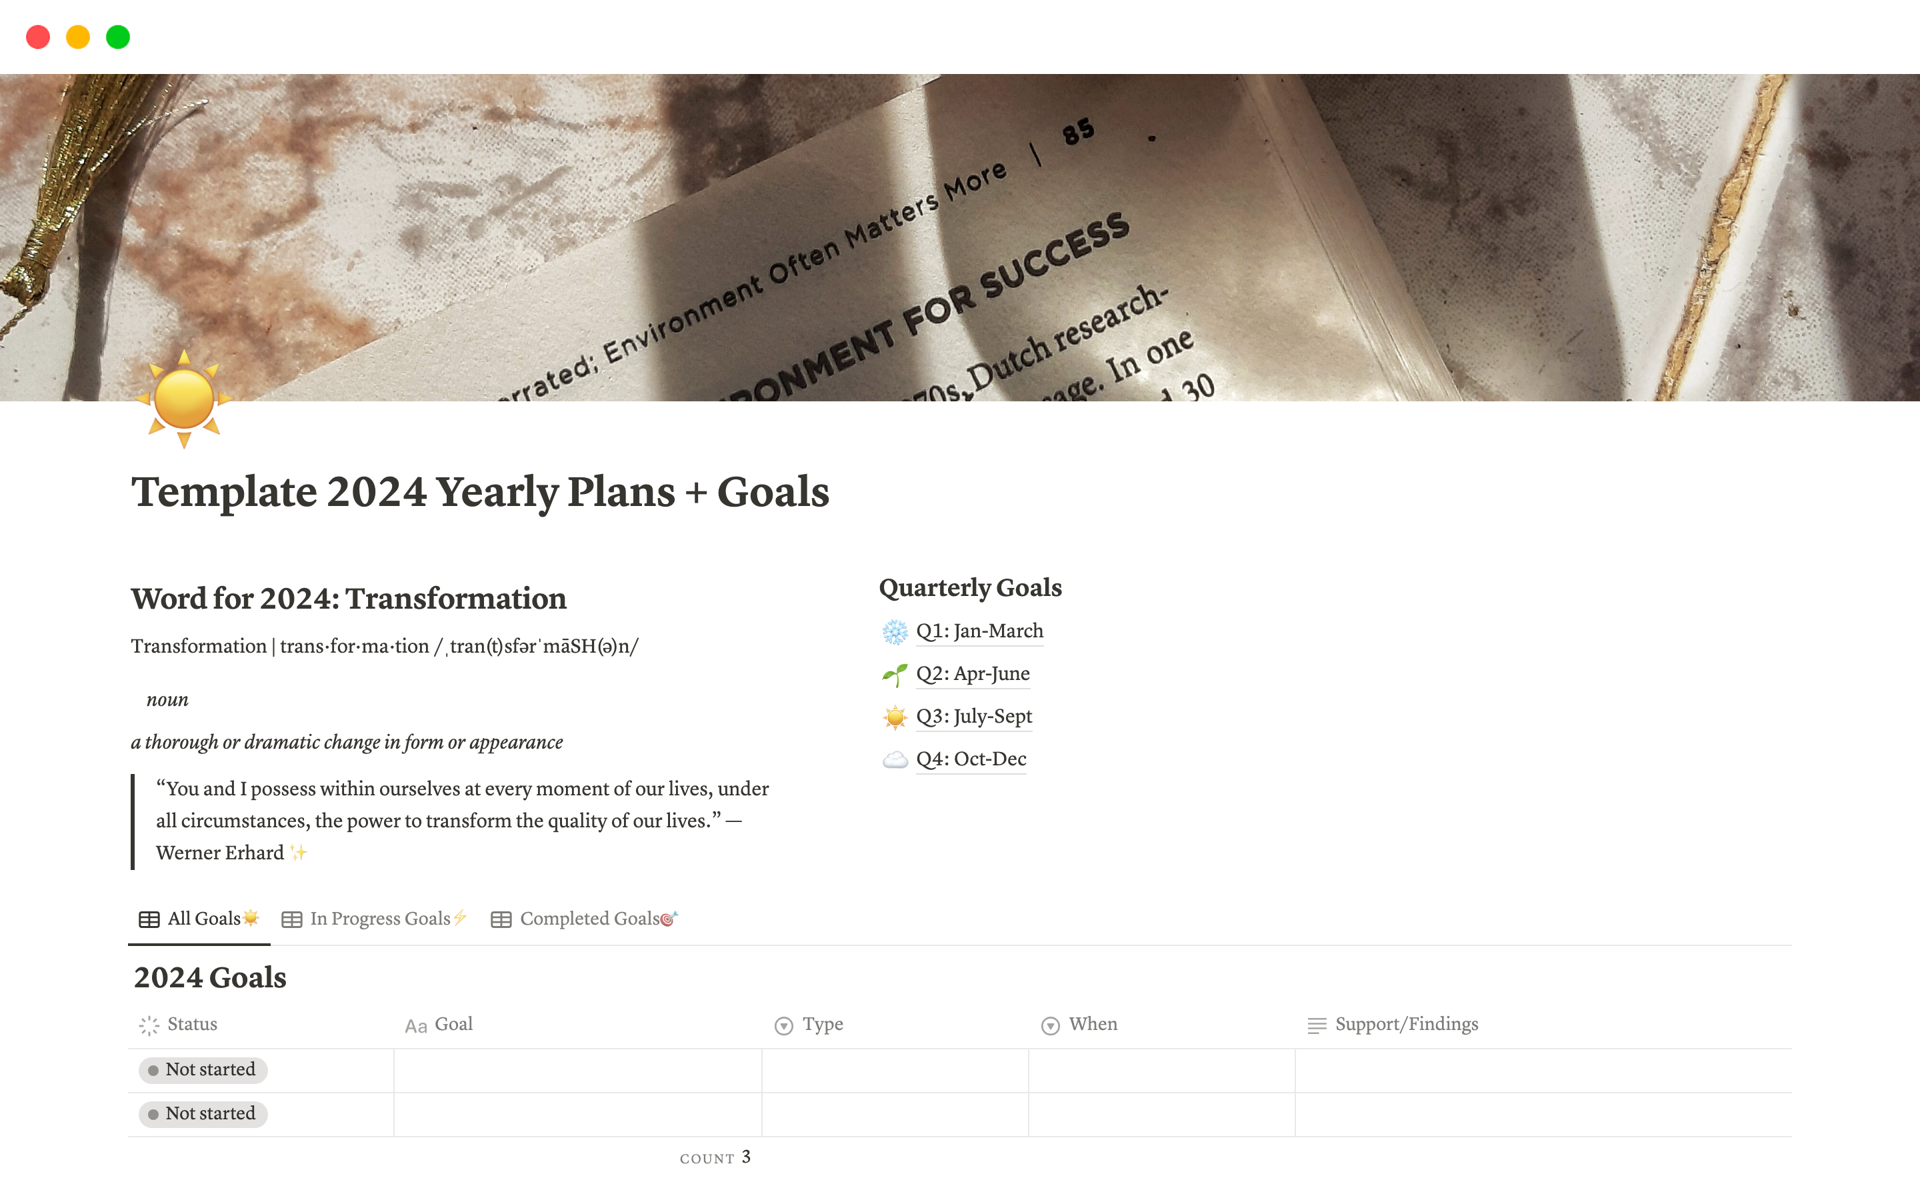 A template preview for 2024 Yearly Plans and Goals